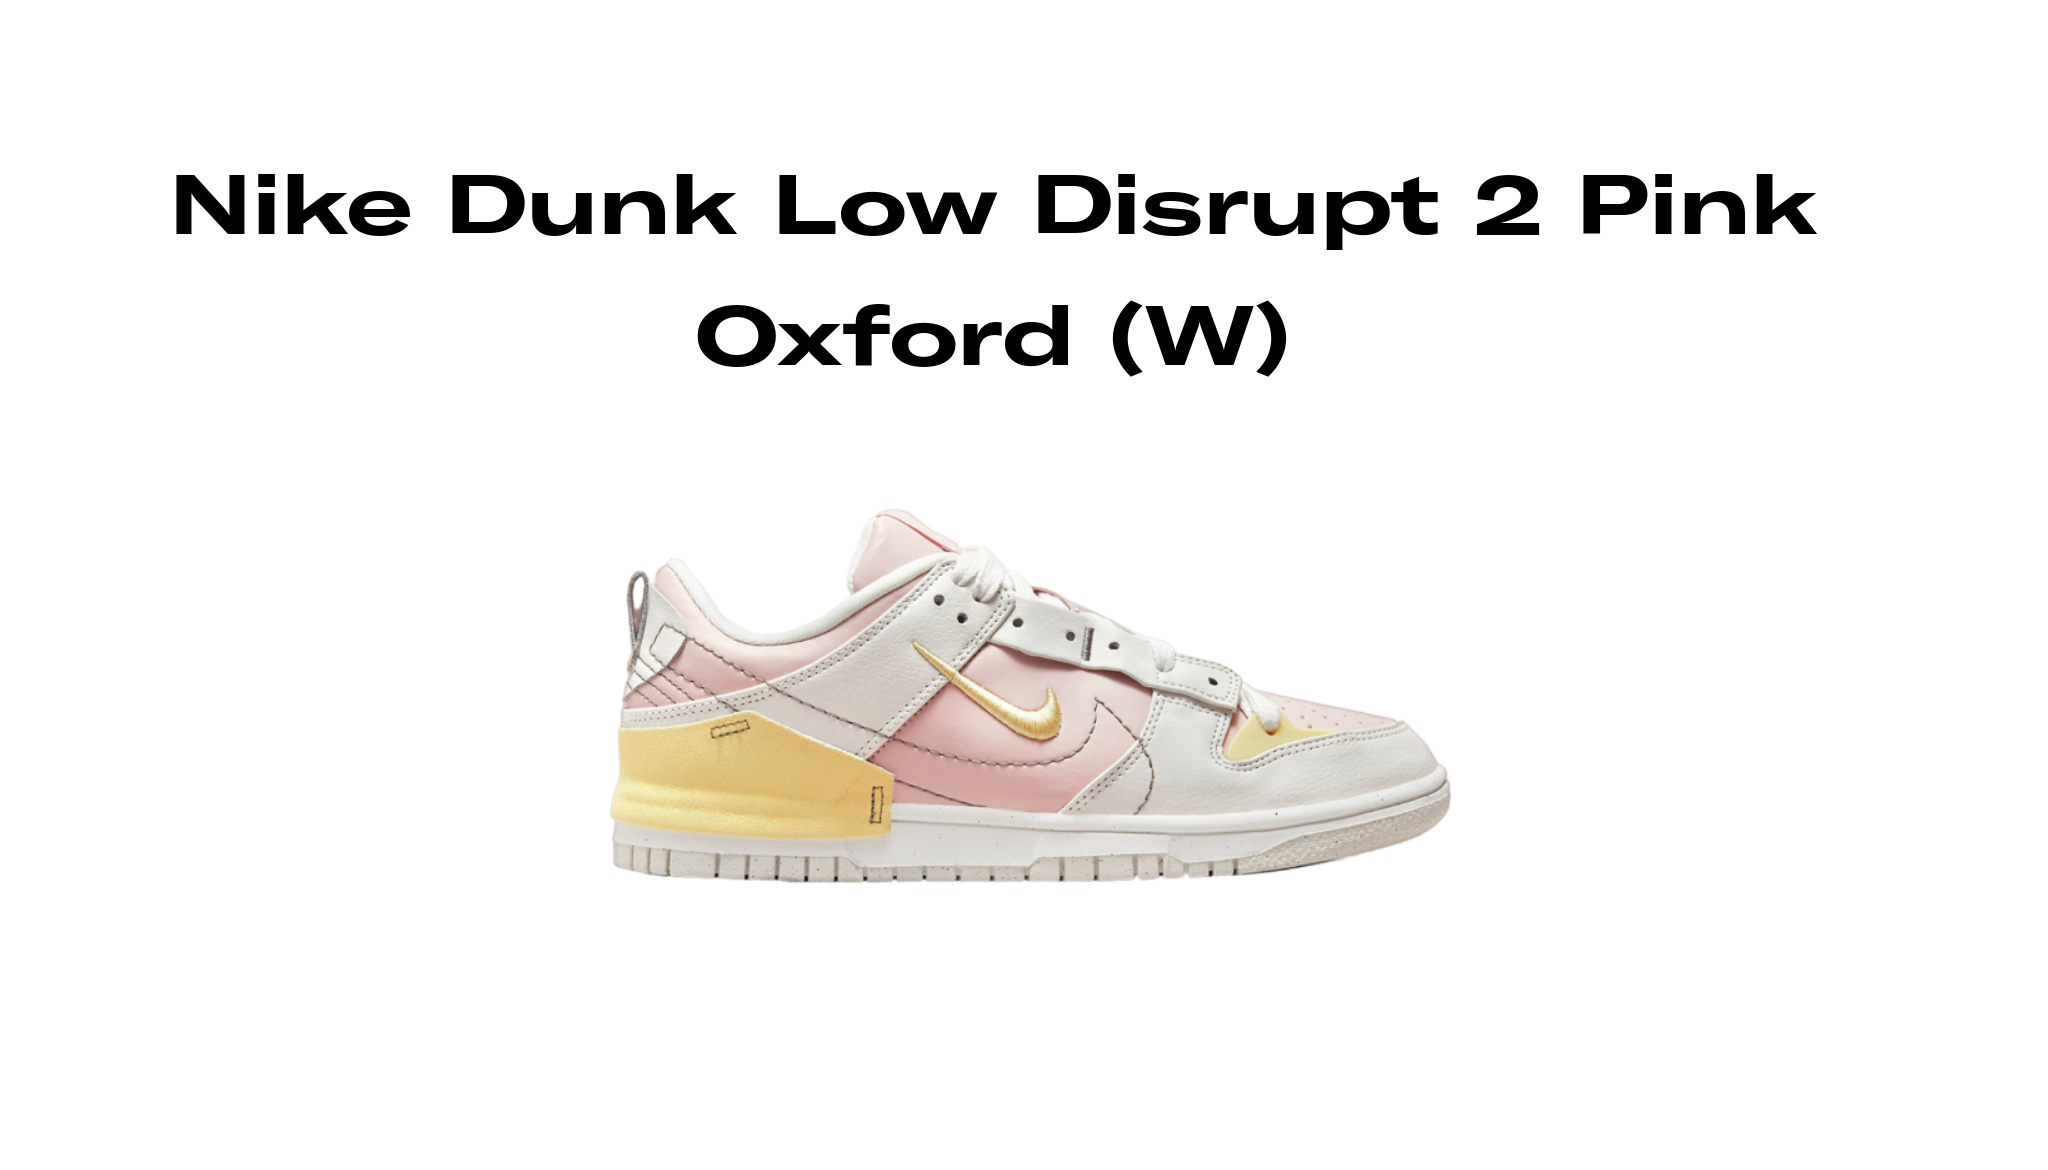 Nike Dunk Low Disrupt 2 Pink Oxford (W), Raffles and Release Date | Sole Retriever